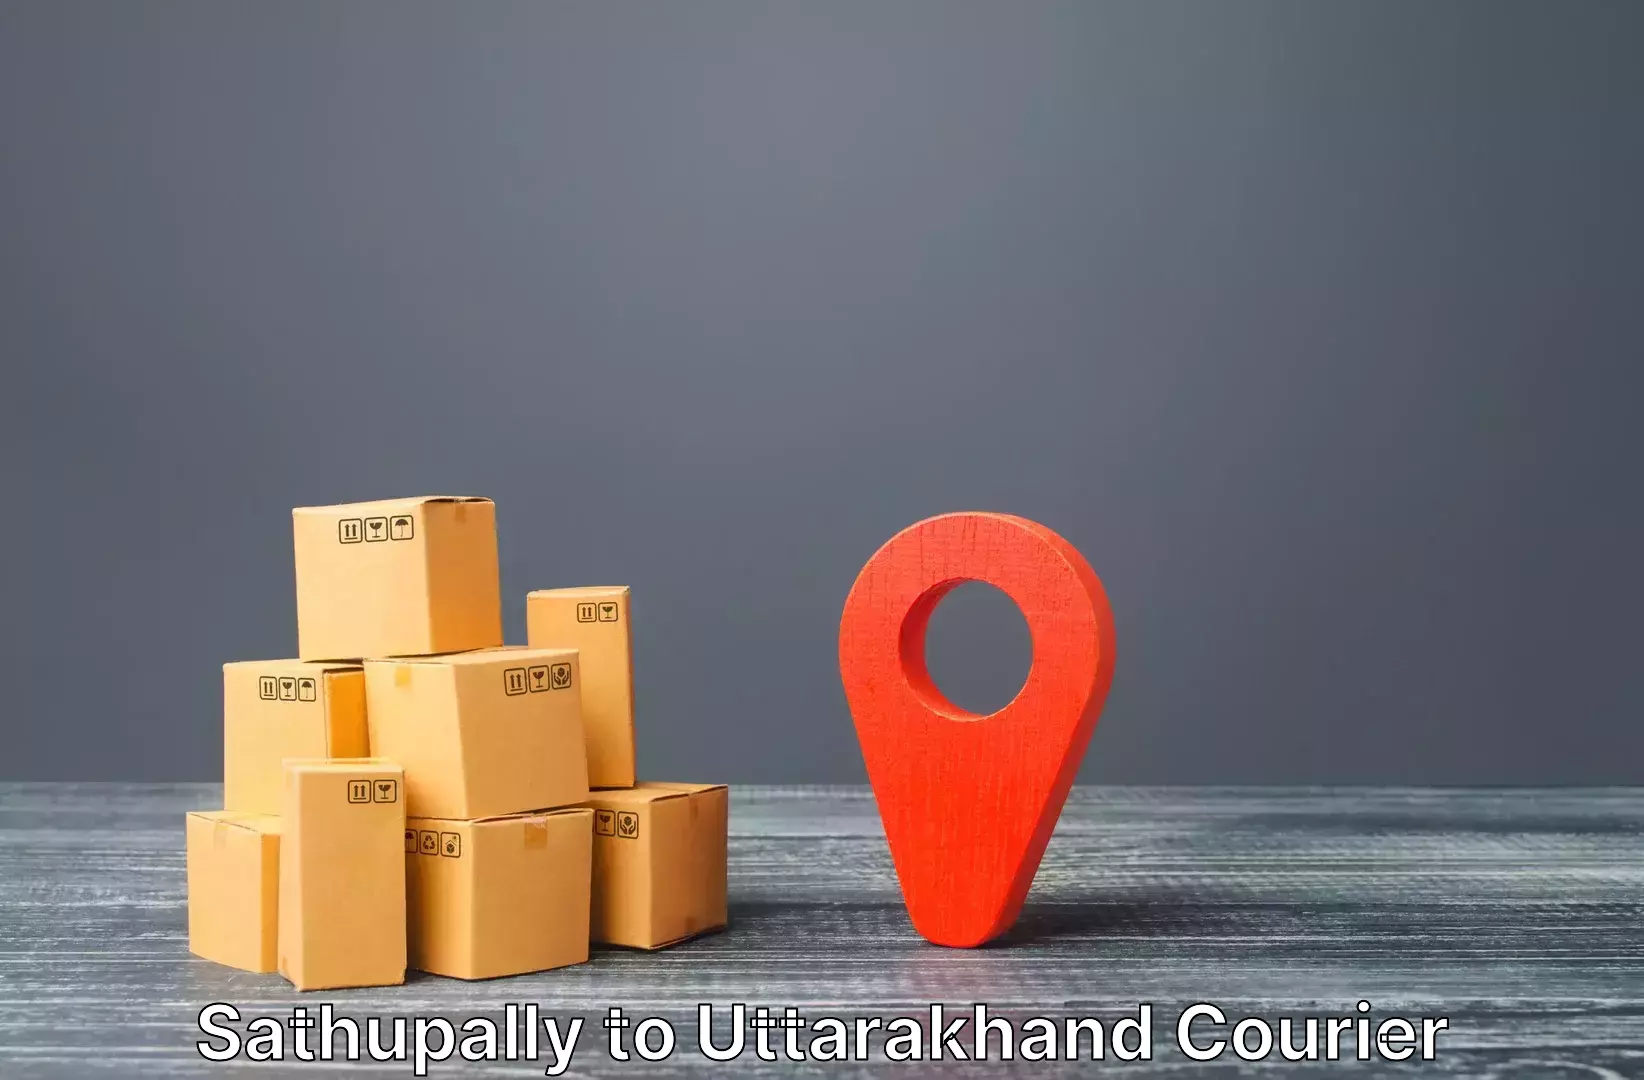 Instant baggage transport quote Sathupally to Roorkee